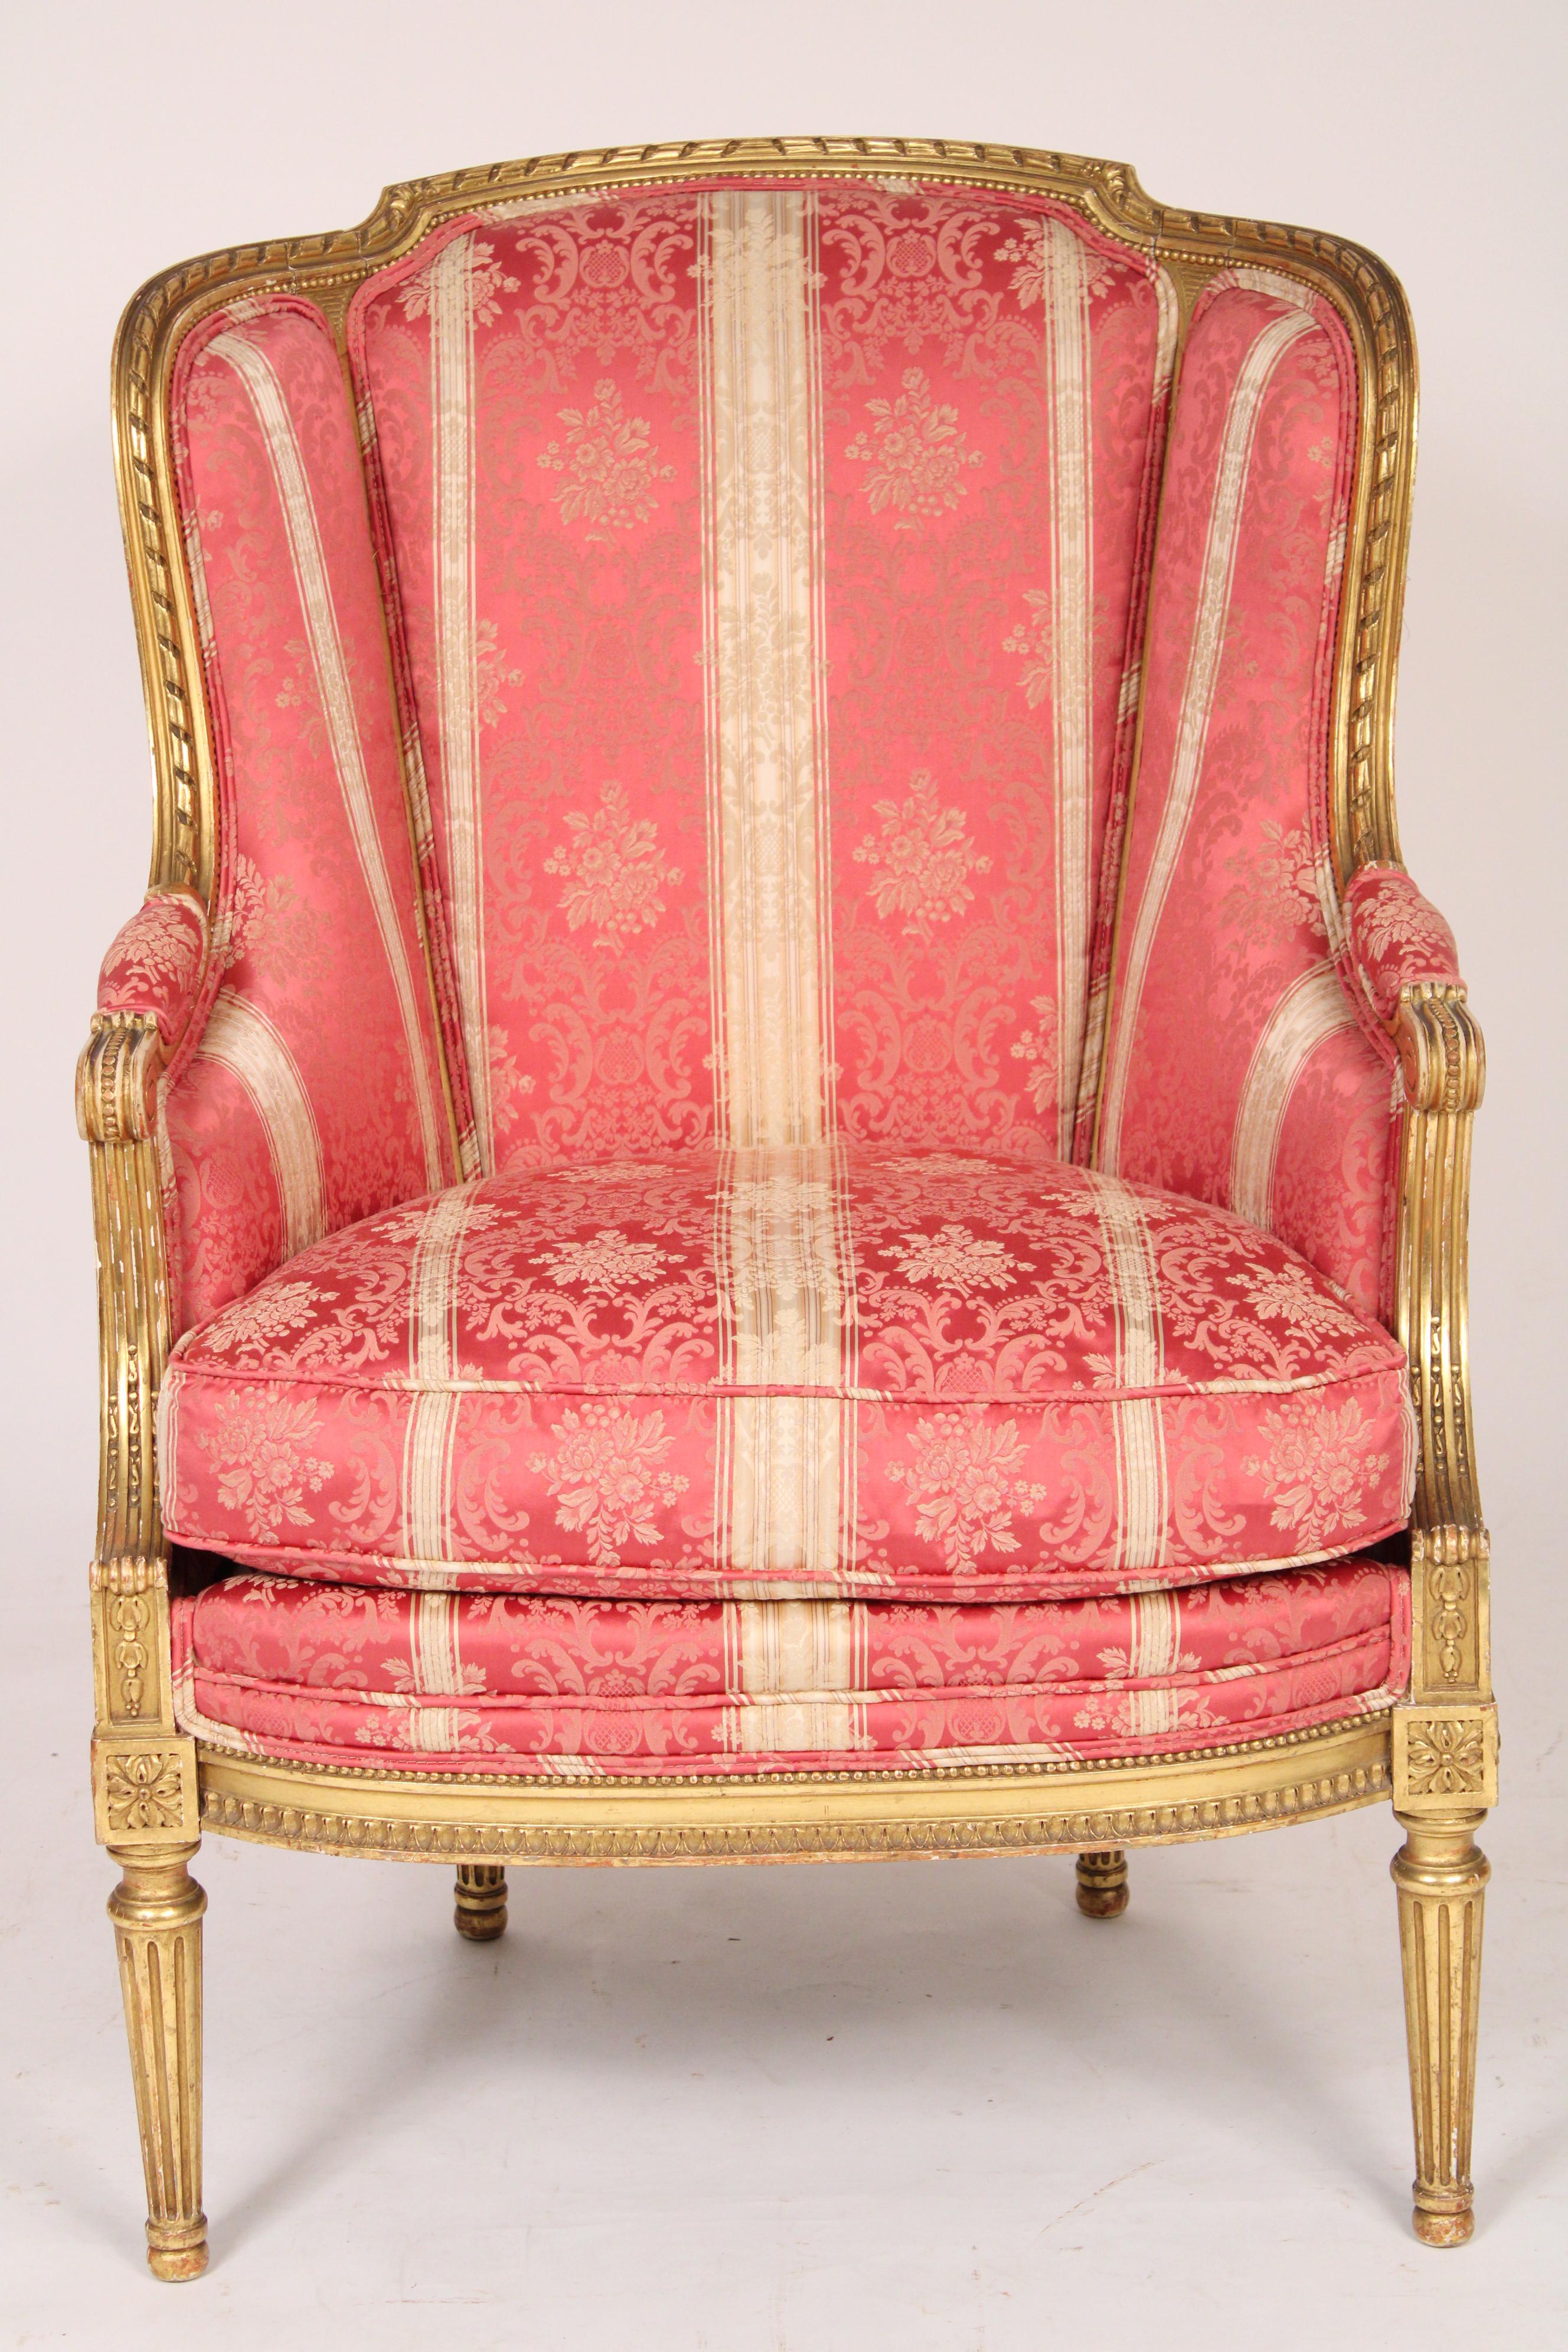 Antique Louis XVI style gilt wood (gold leaf) bergere, circa 1900. With a down filled seat.